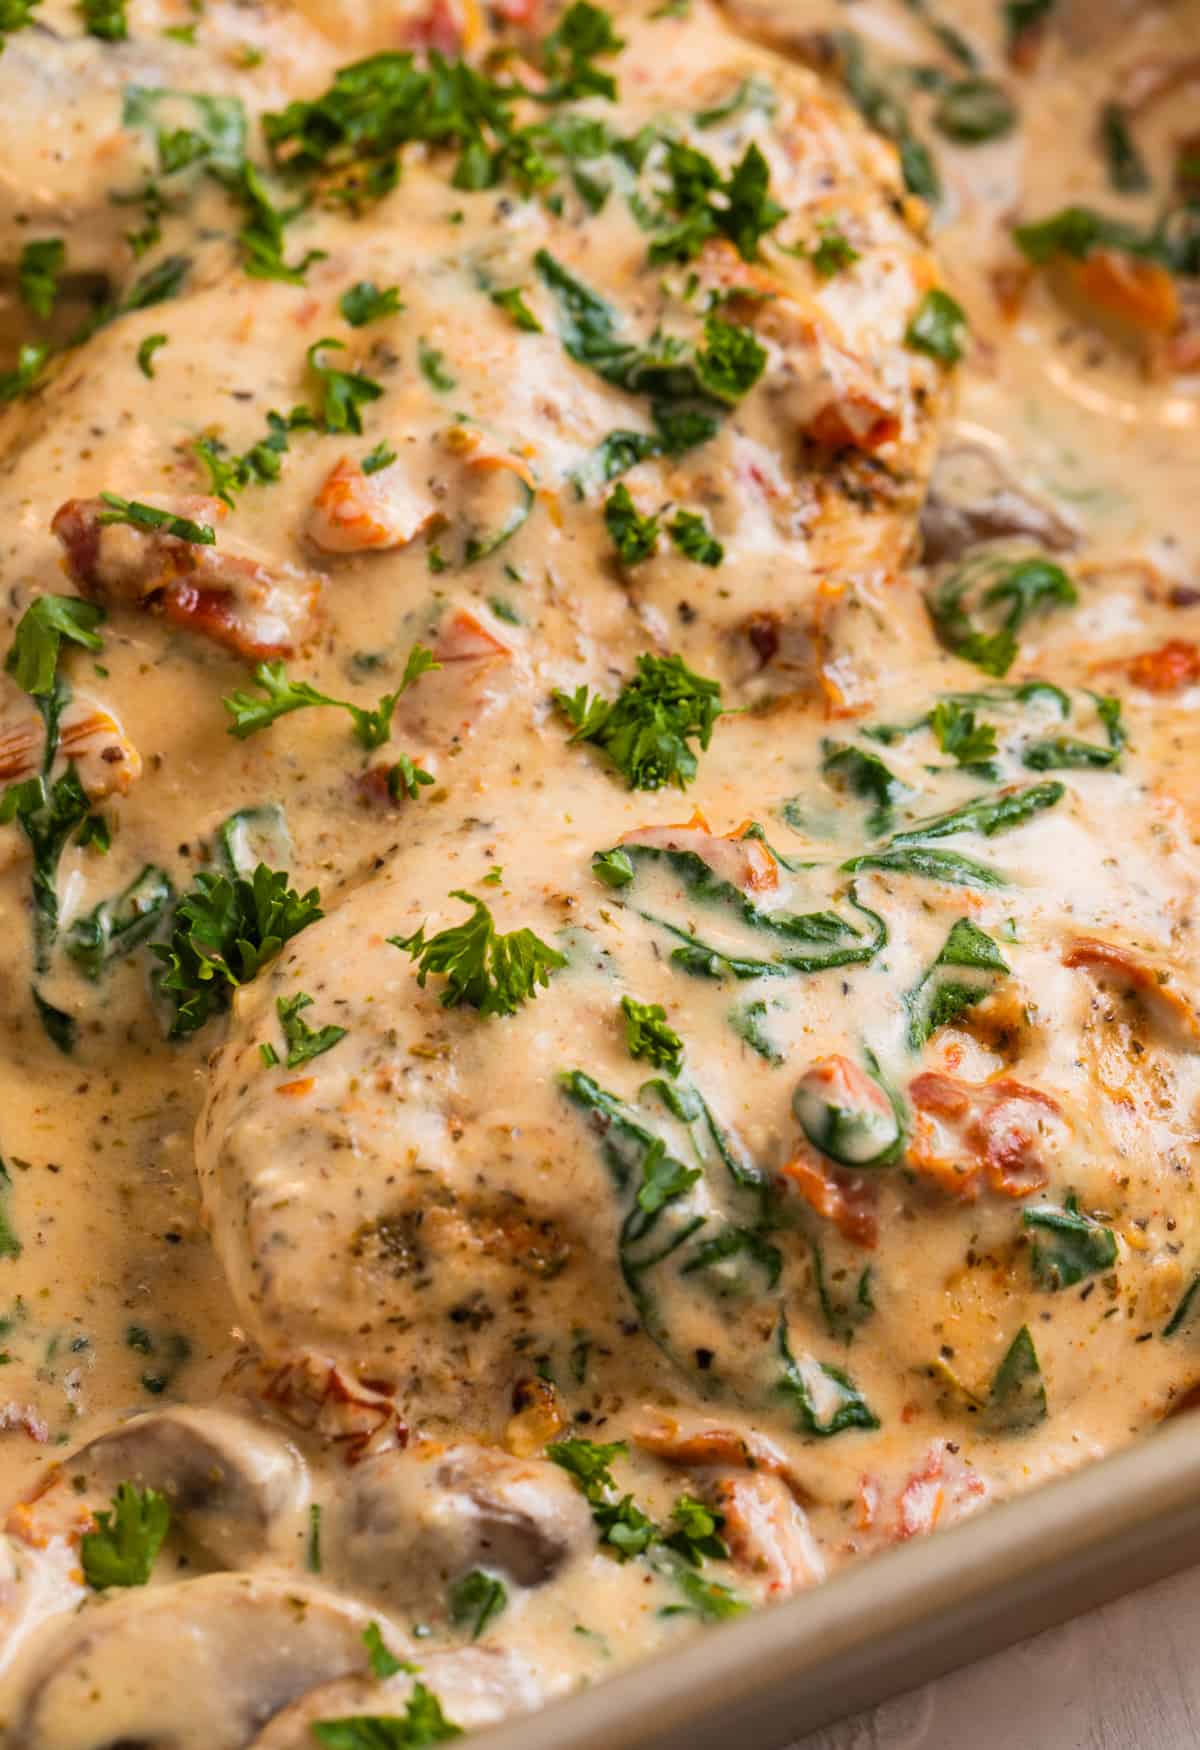 Baked creamy tuscan chicken in pan topped with fresh parsley.